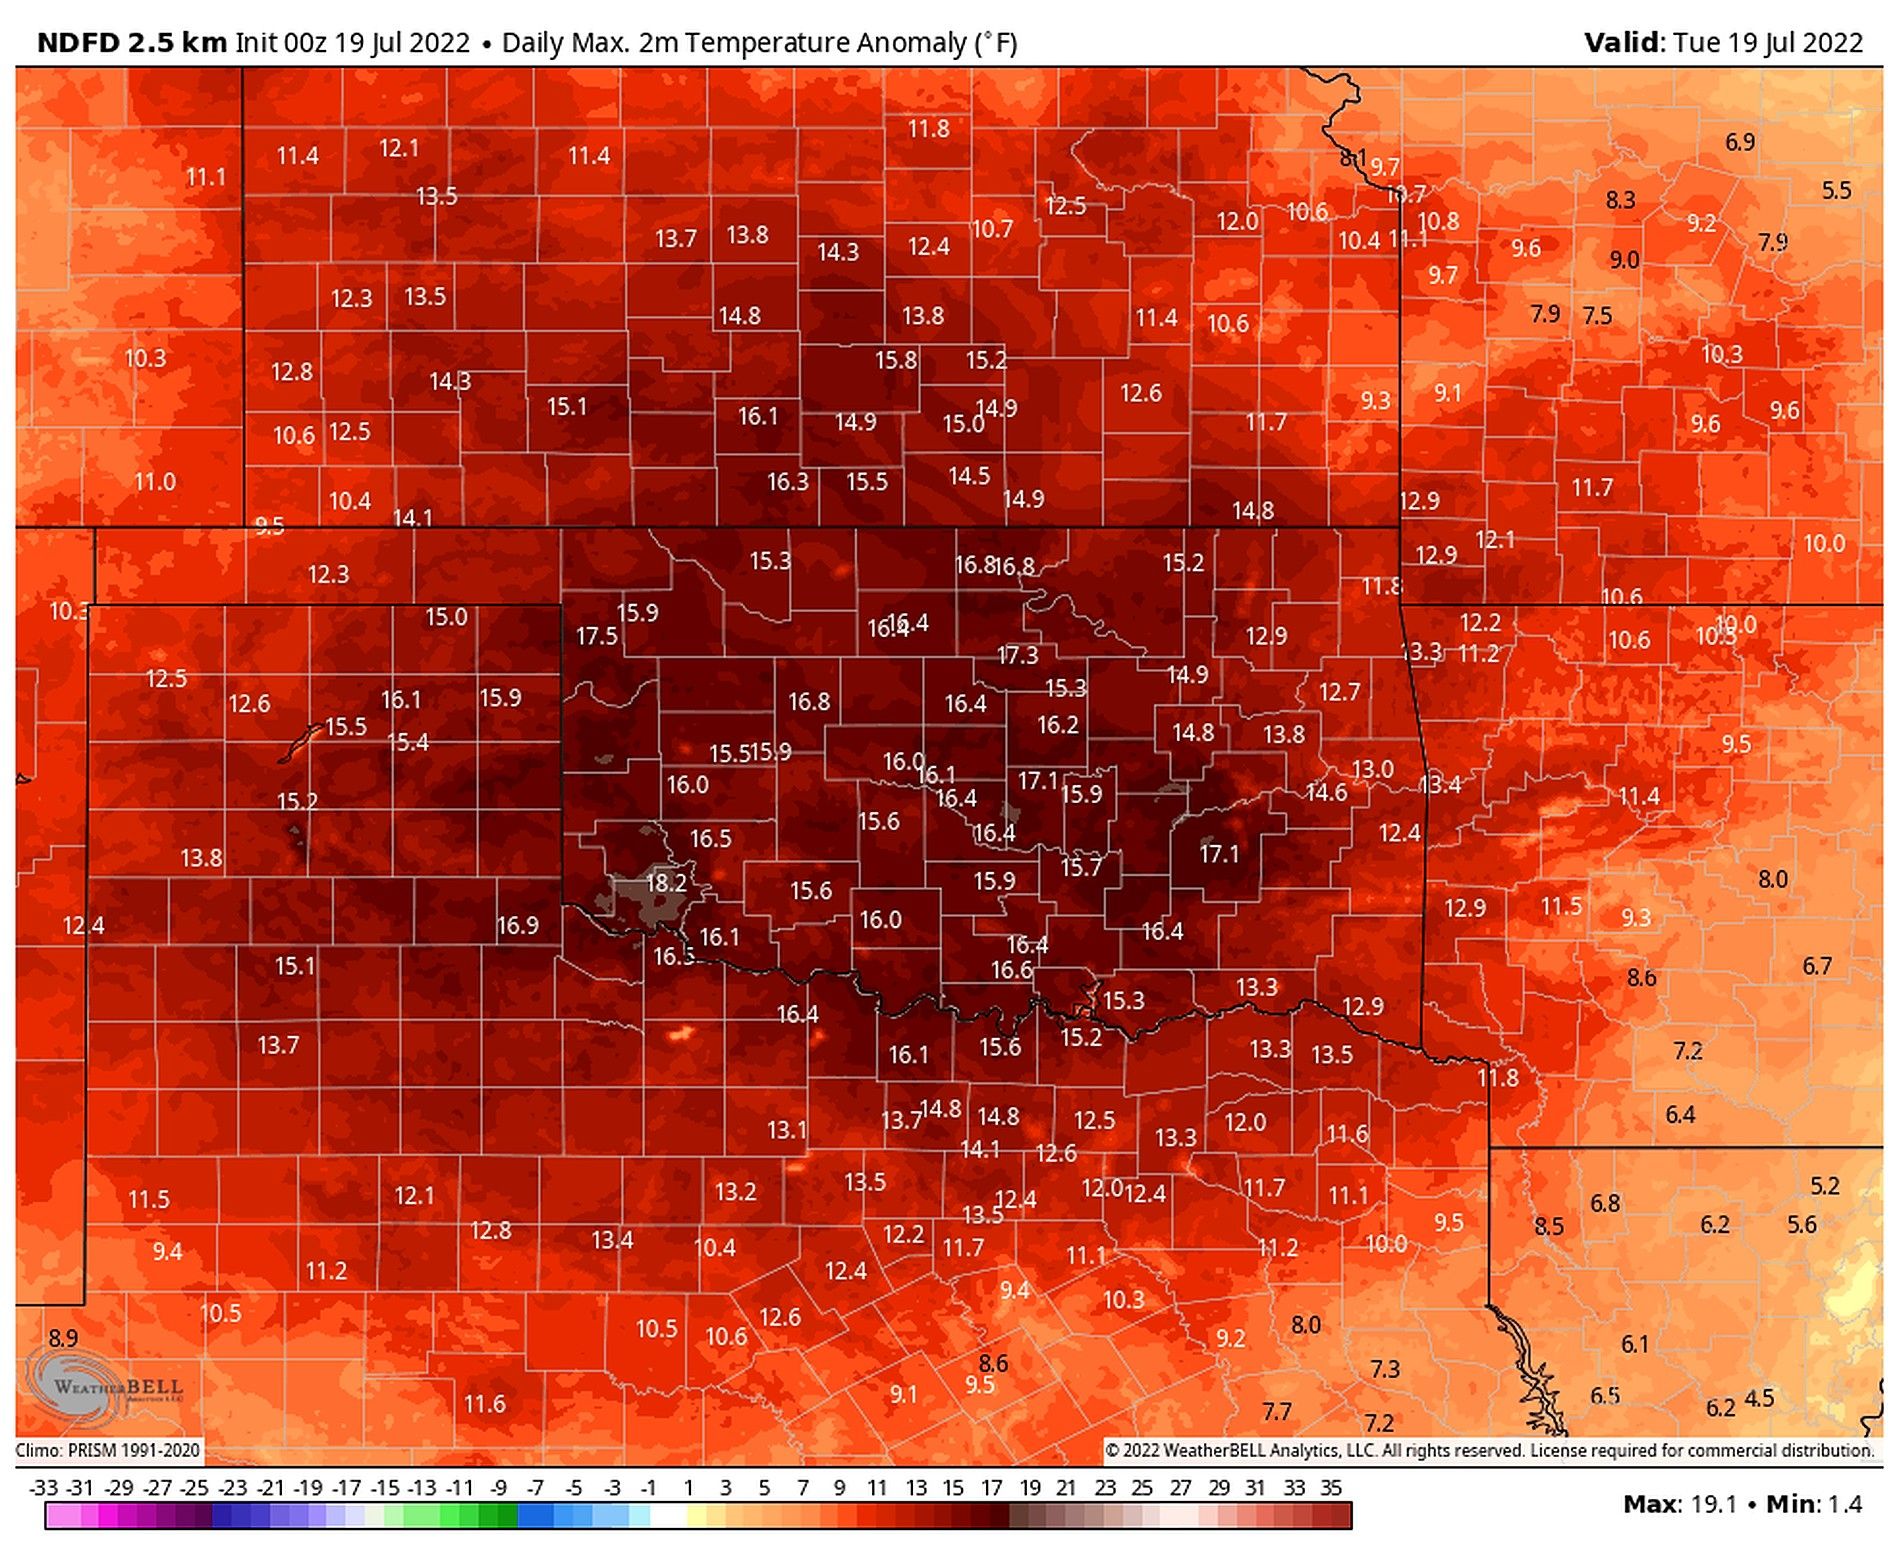 An image of a weather map showing extreme heat over the entire state of Oklahoma.